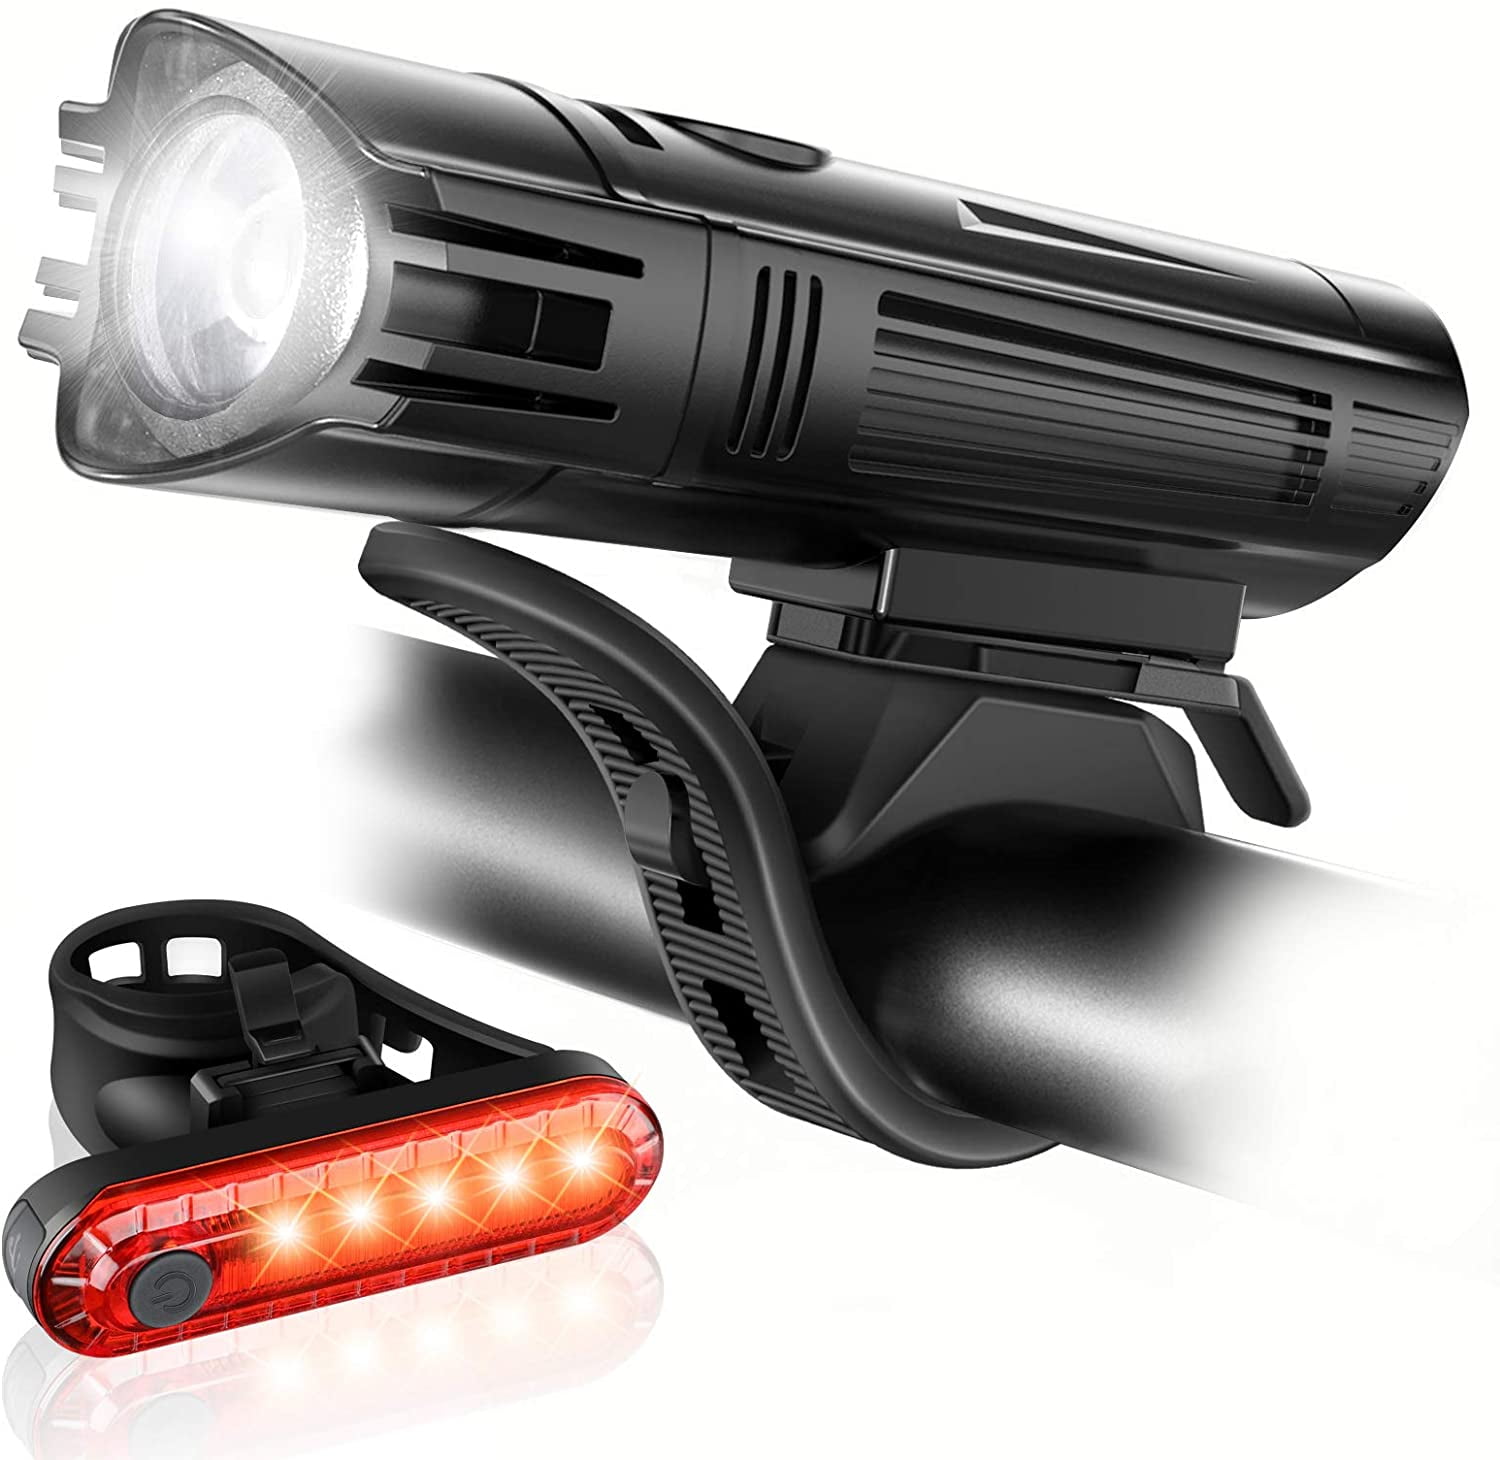 Reboos USB Rechargeable LED Bright Bike Front Headlight and Rear Tail Light Set 